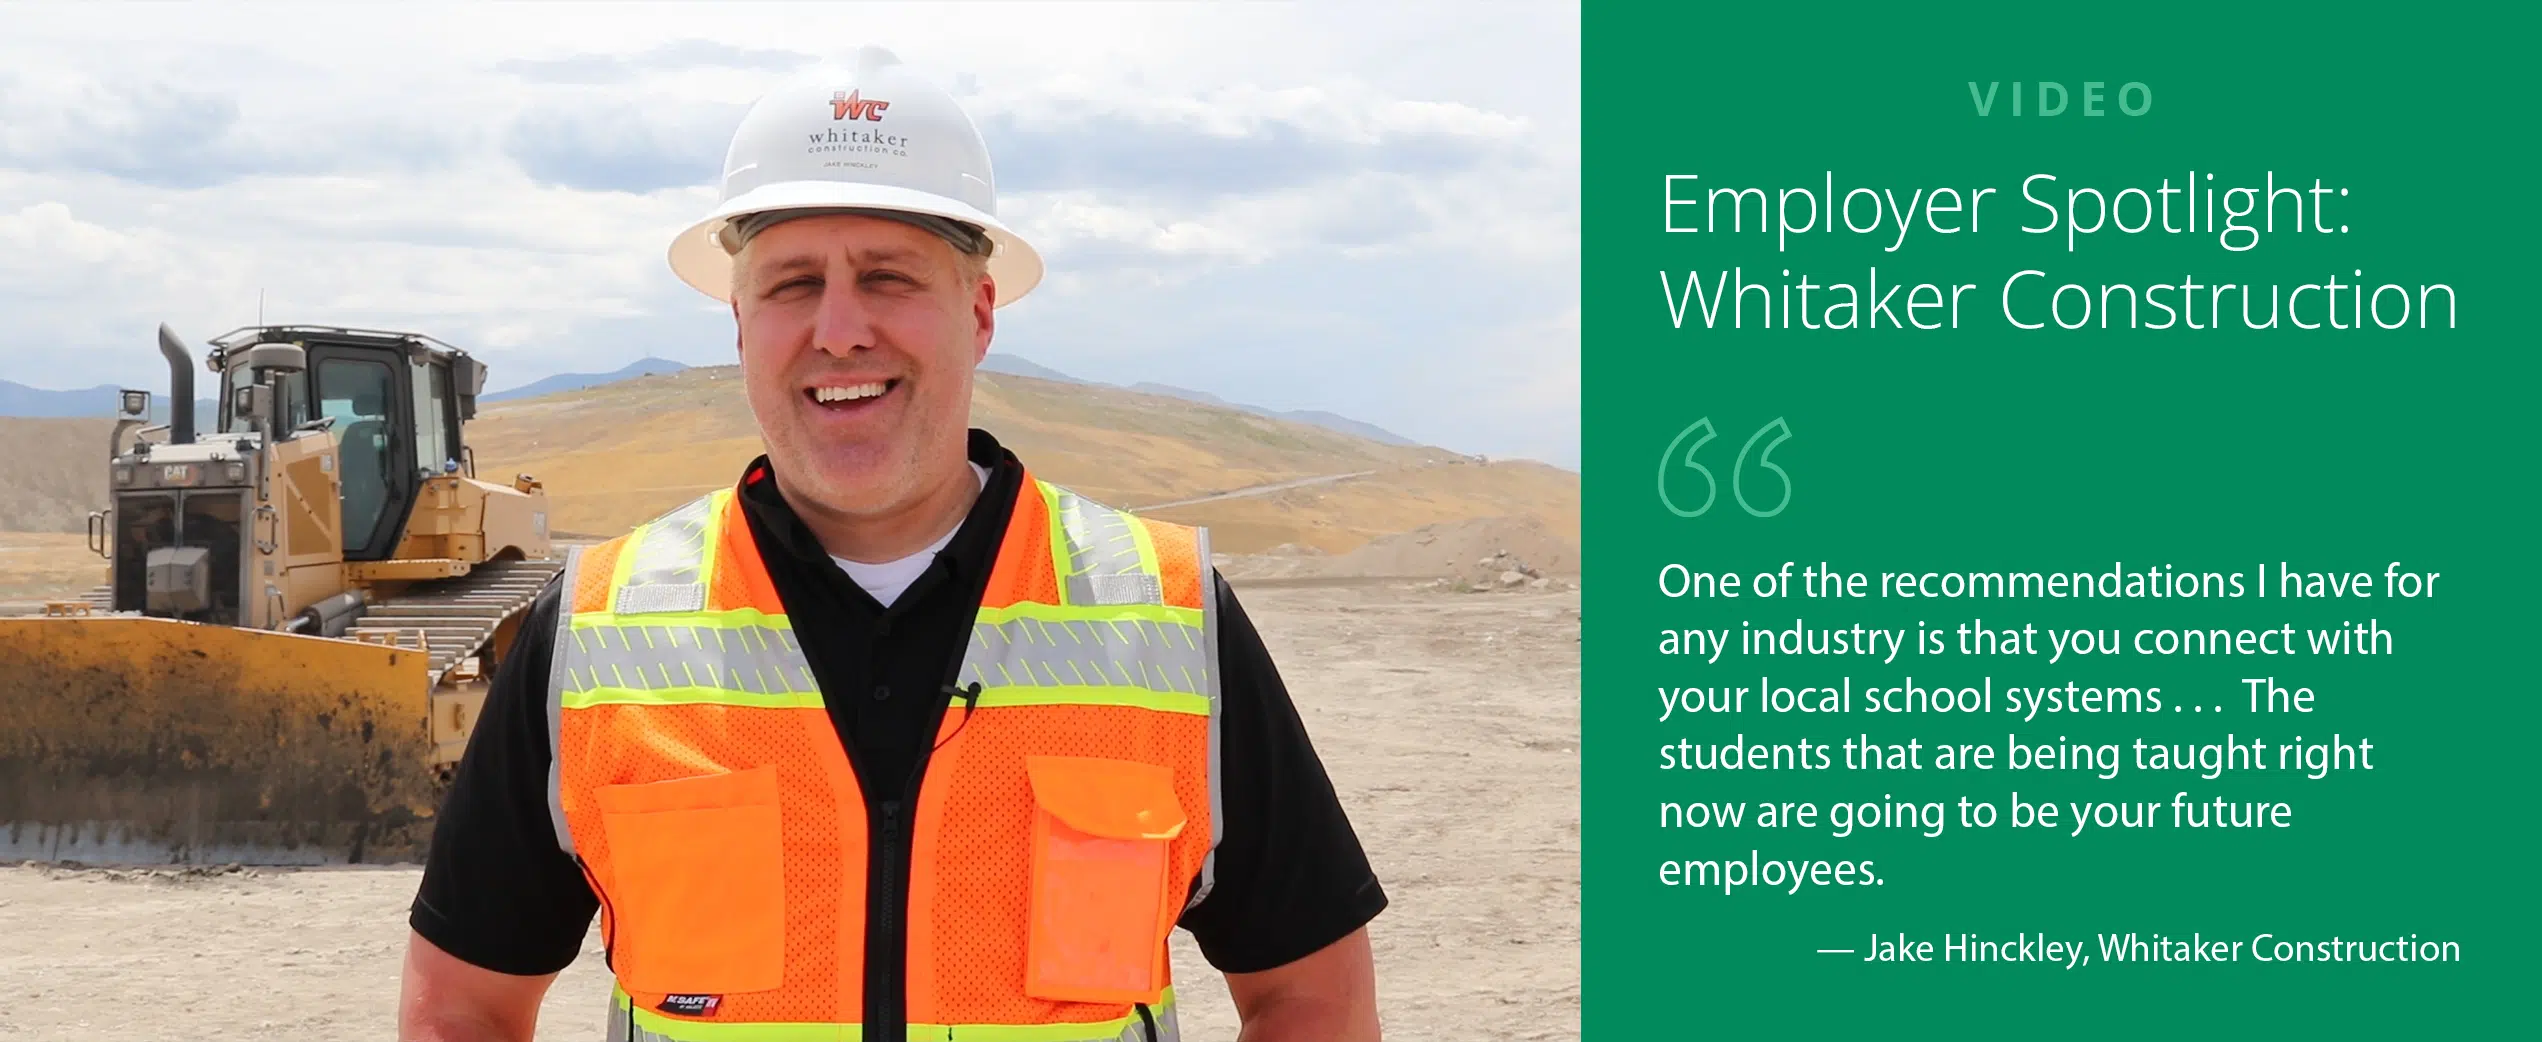 Whitaker Construction connects with education to connect with future candidates